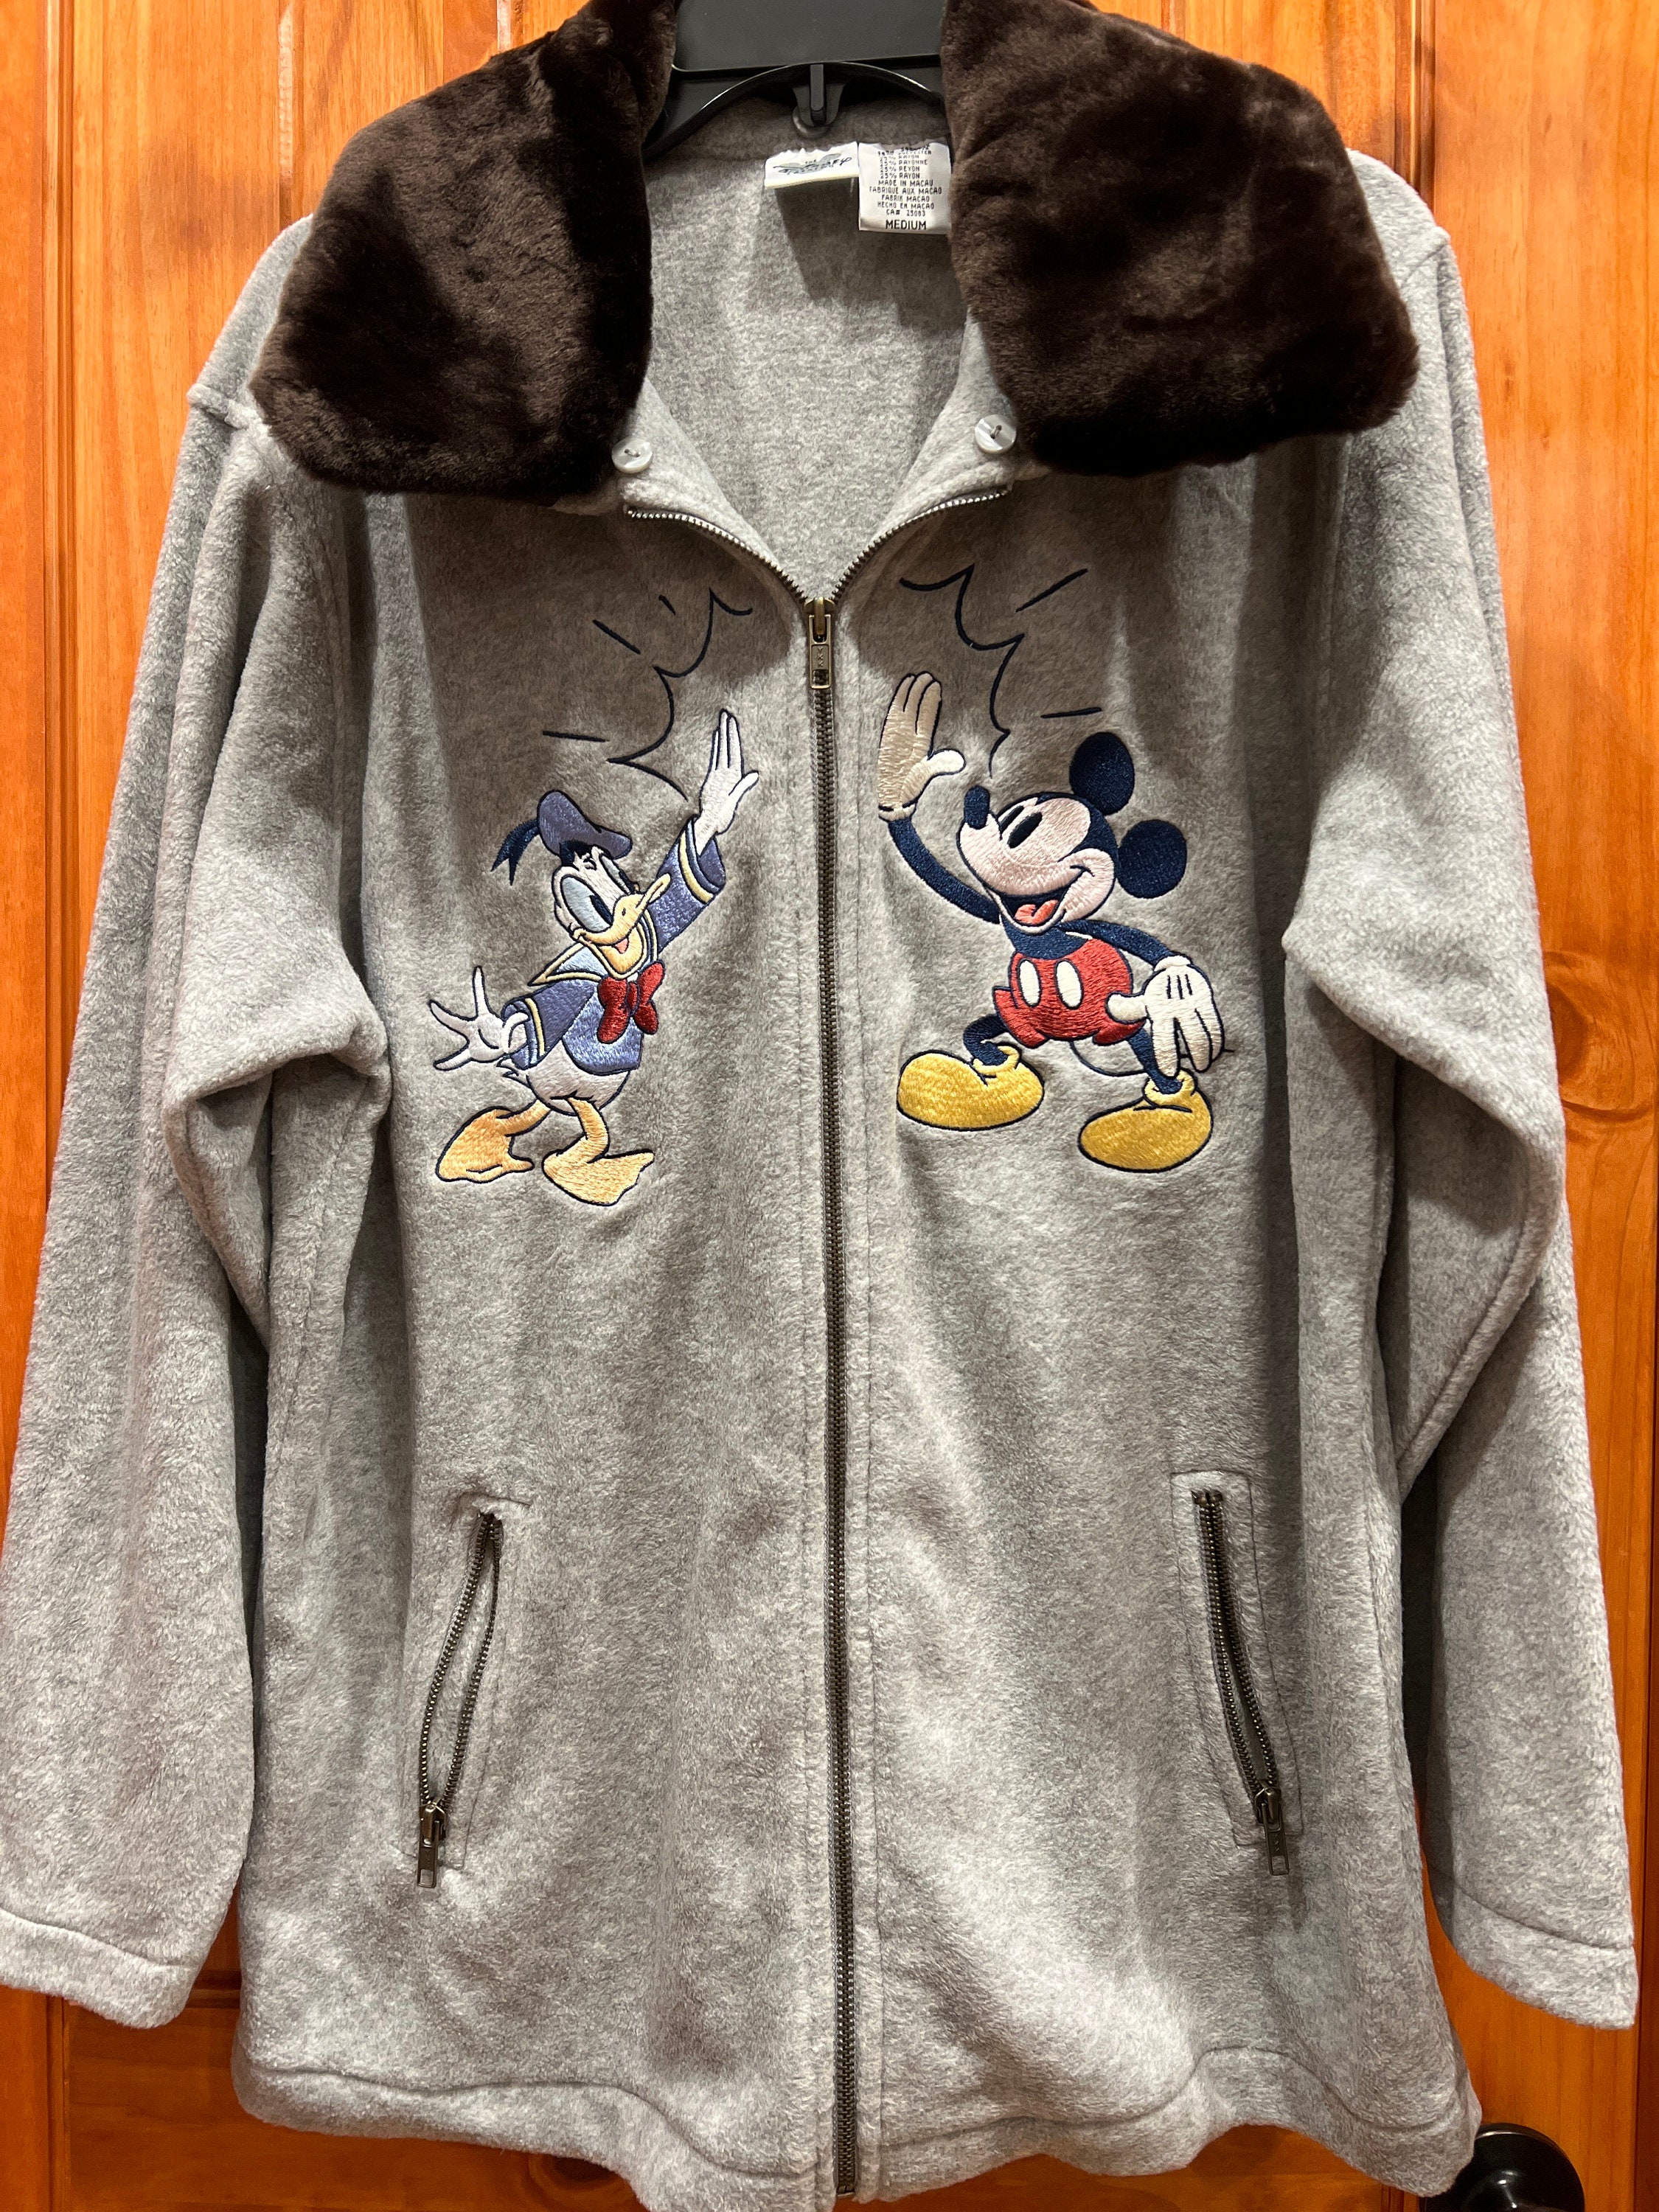 Mickey Mouse and Friends Zip Fleece Jacket for Men by Columbia